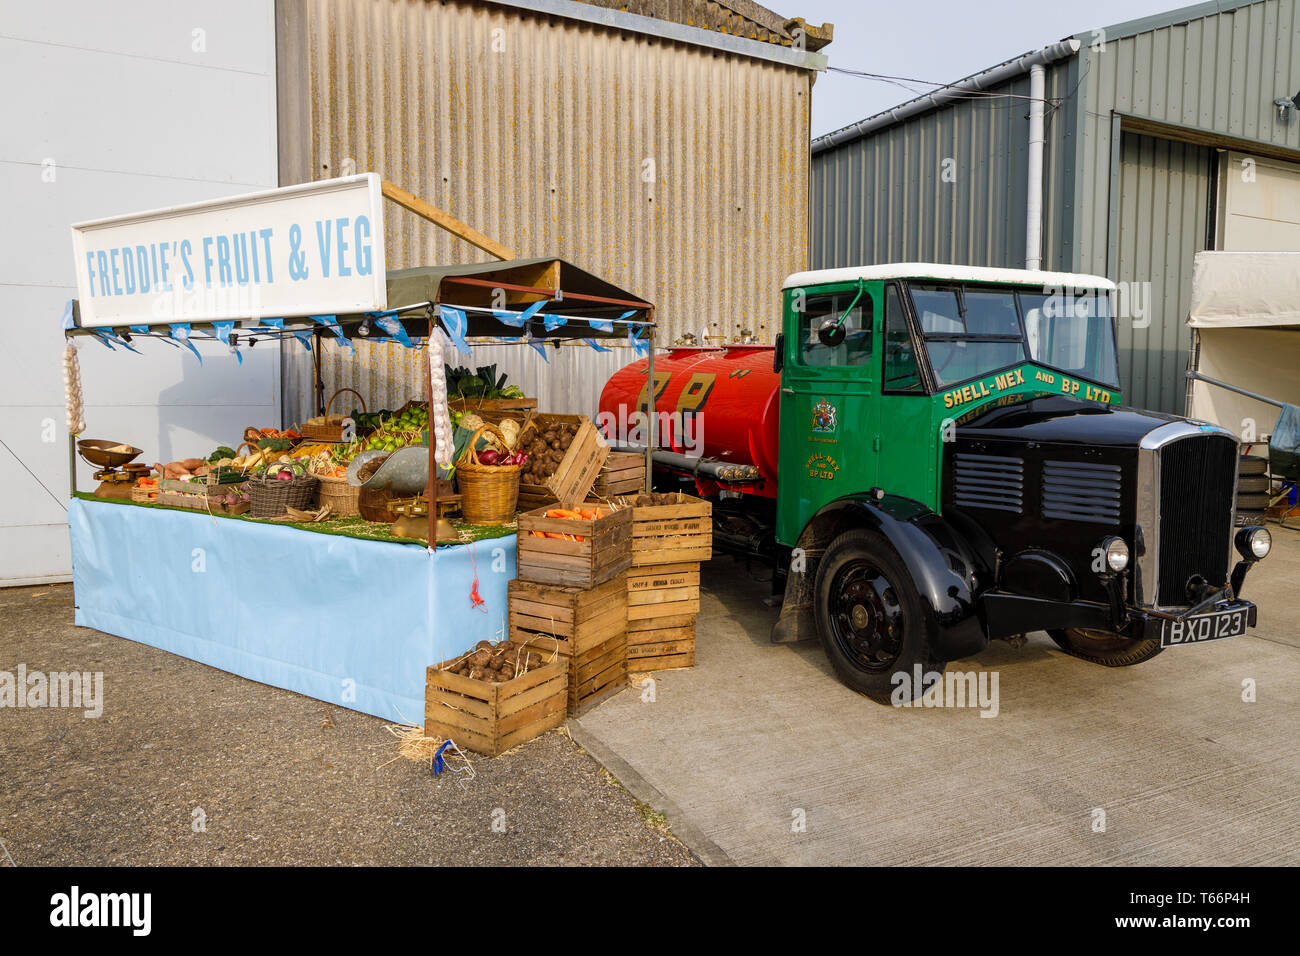 1935 Dennis Shell-Mex and BP fuel tanker beside a traditional fruit and veg' stall at the 77th Goodwood GRRC Members Meeting, Sussex, UK. Stock Photo